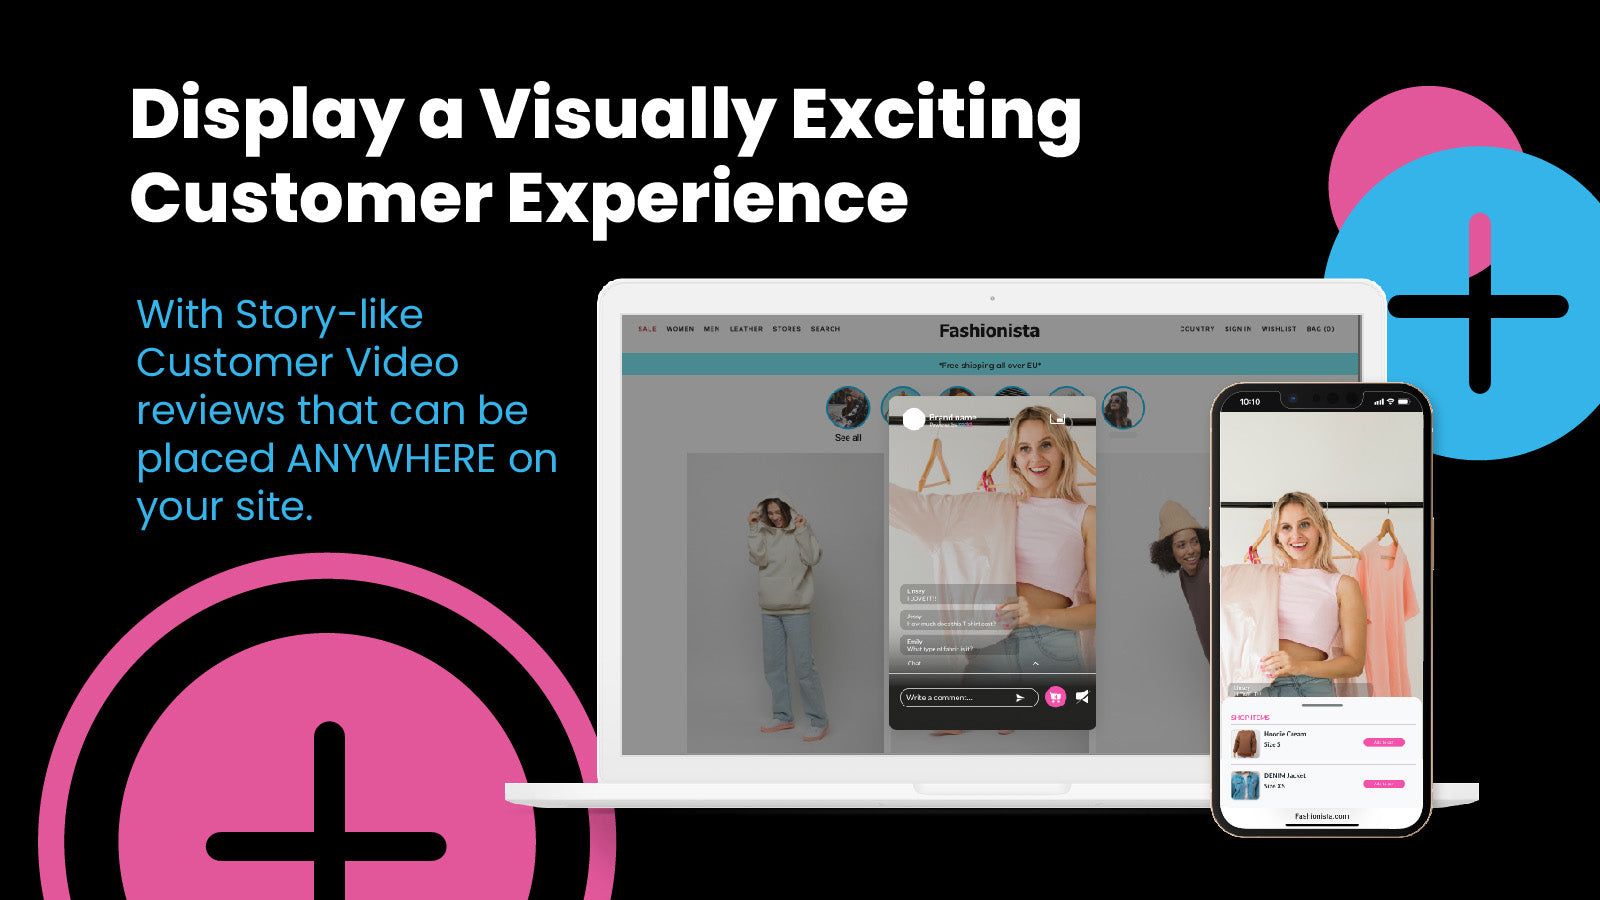 Display a visually exciting customer experience